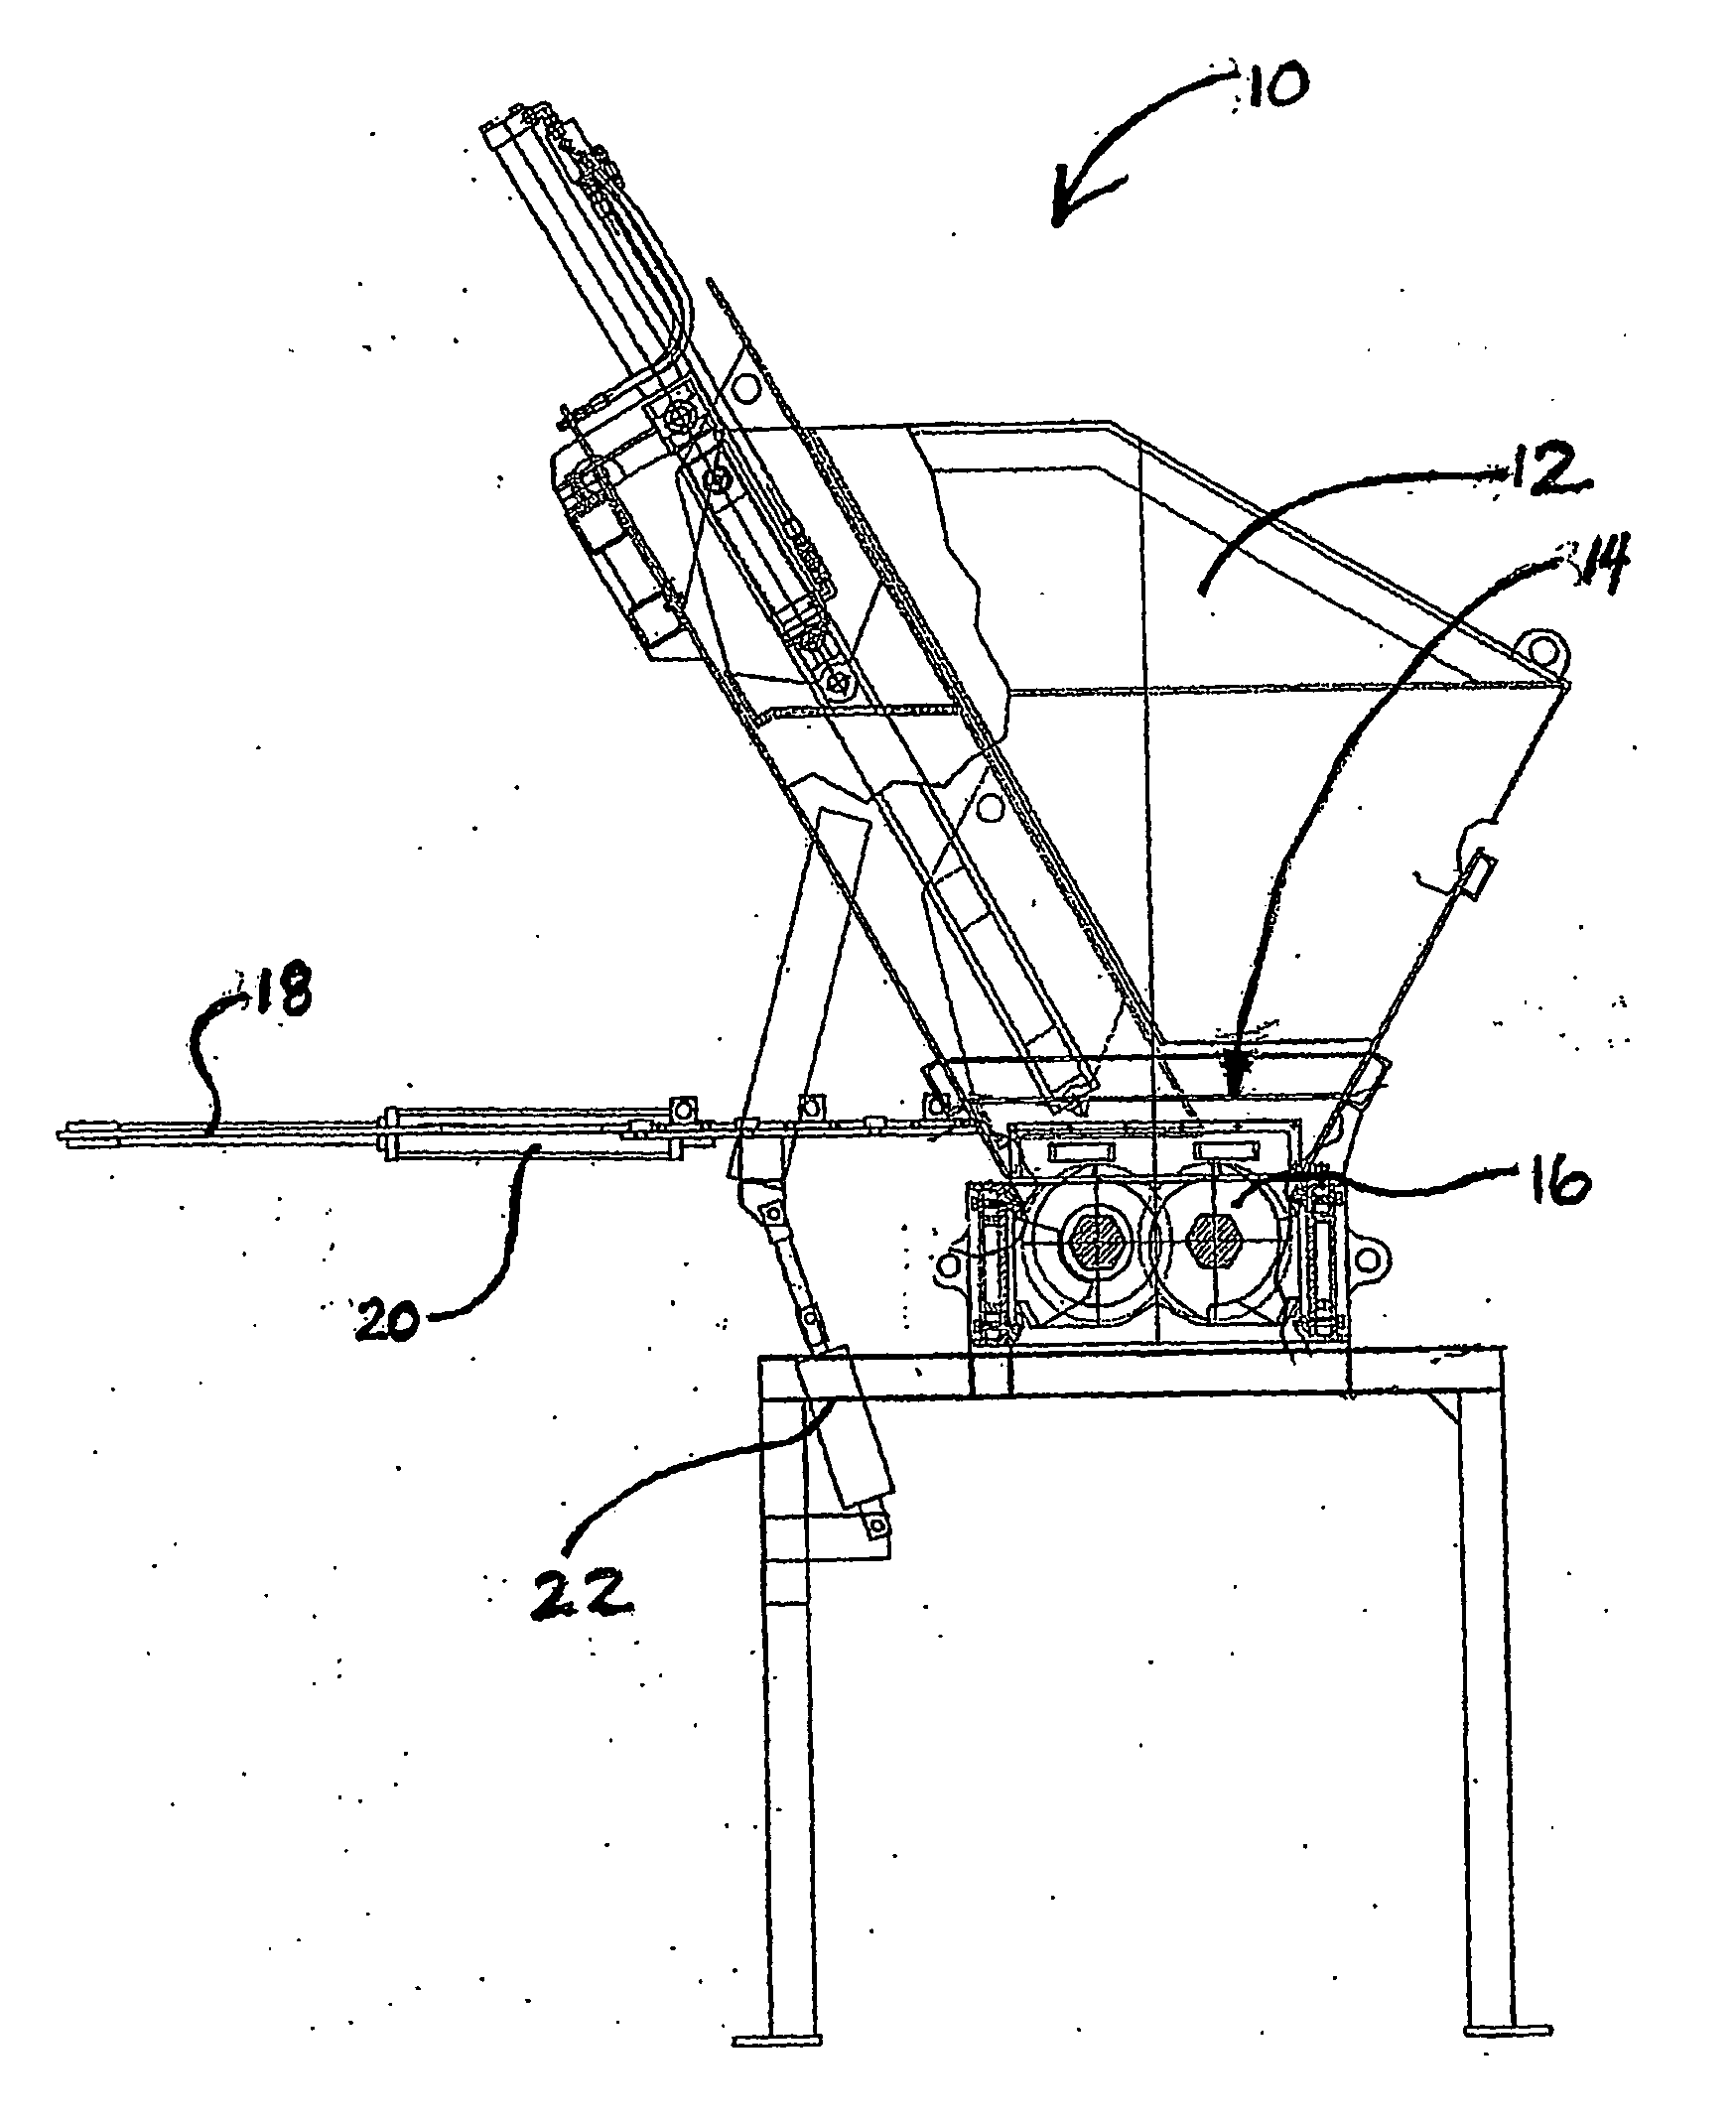 Apparatus and method for transforming solid waste into useful products